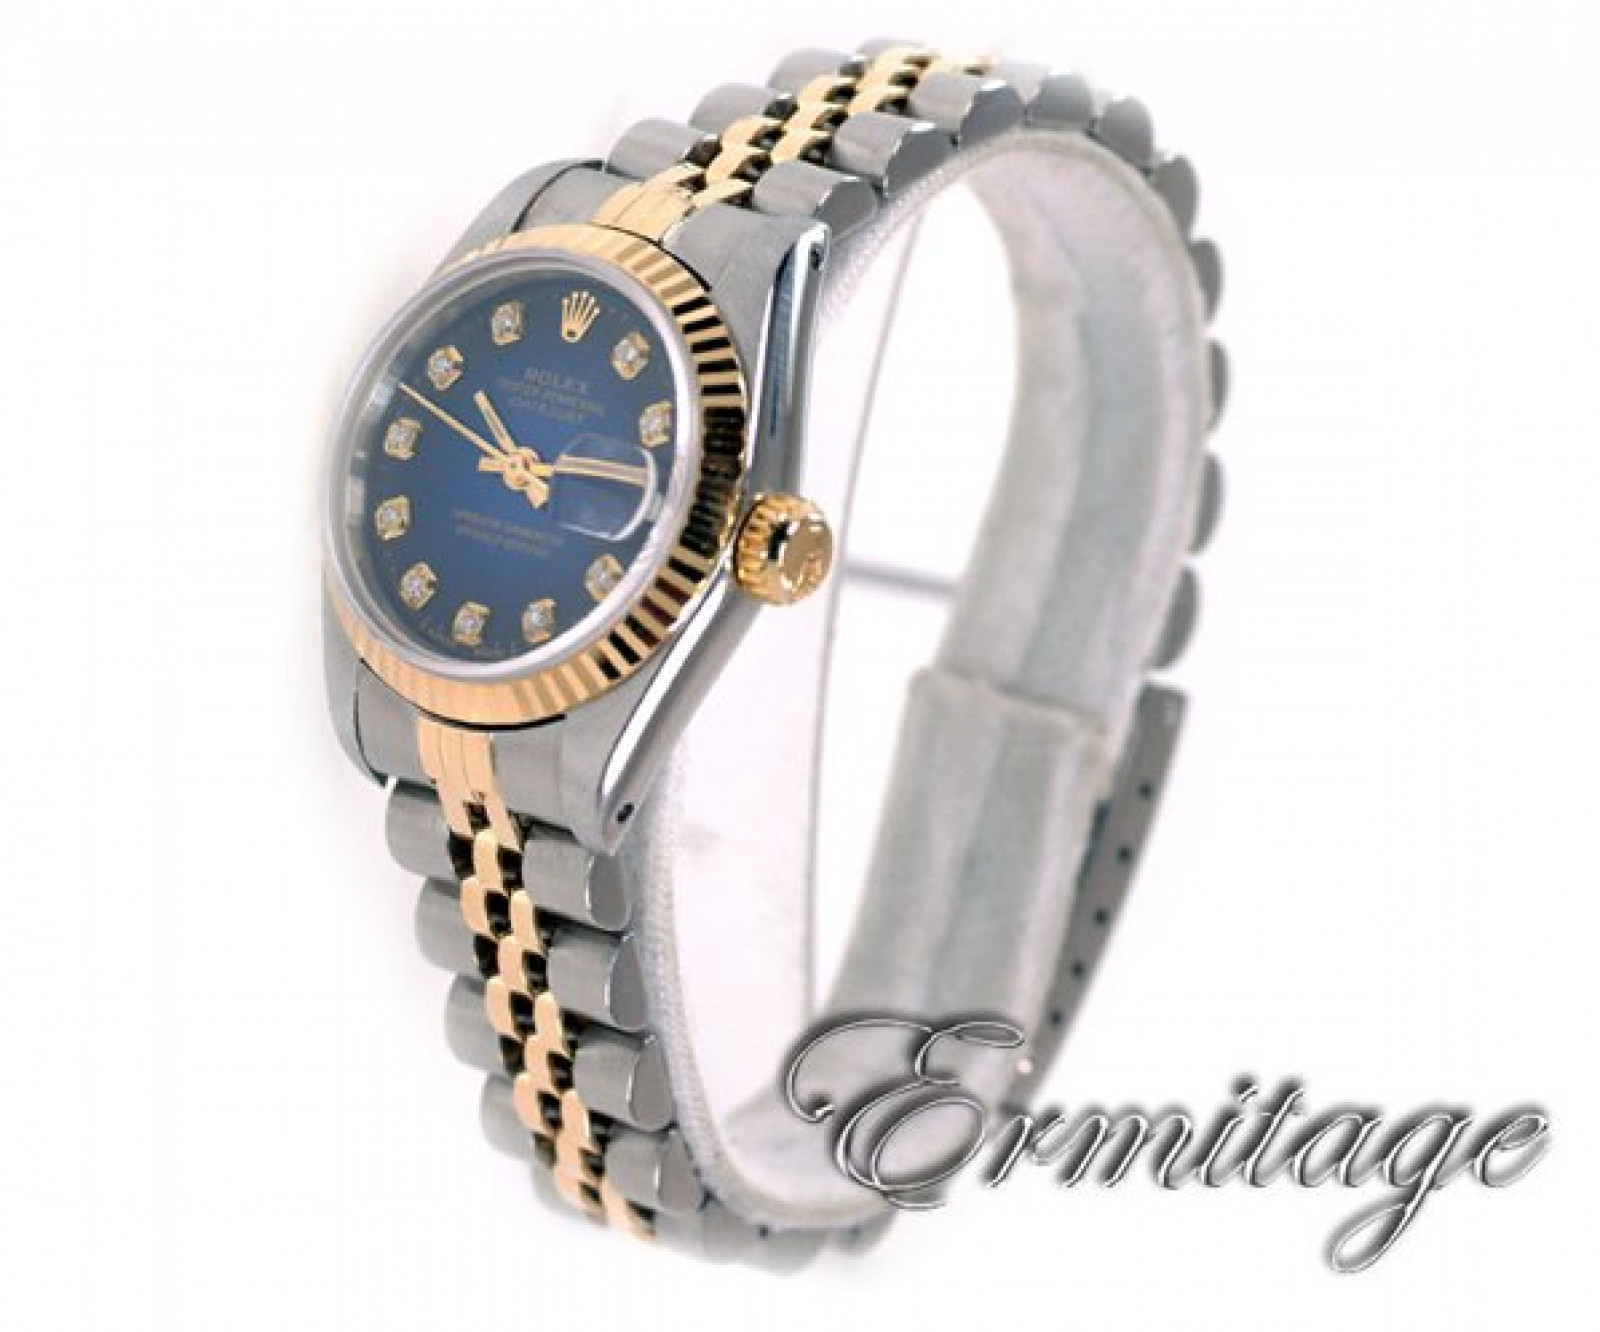 Rolex Datejust 69173 with Diamonds on Blue Dial